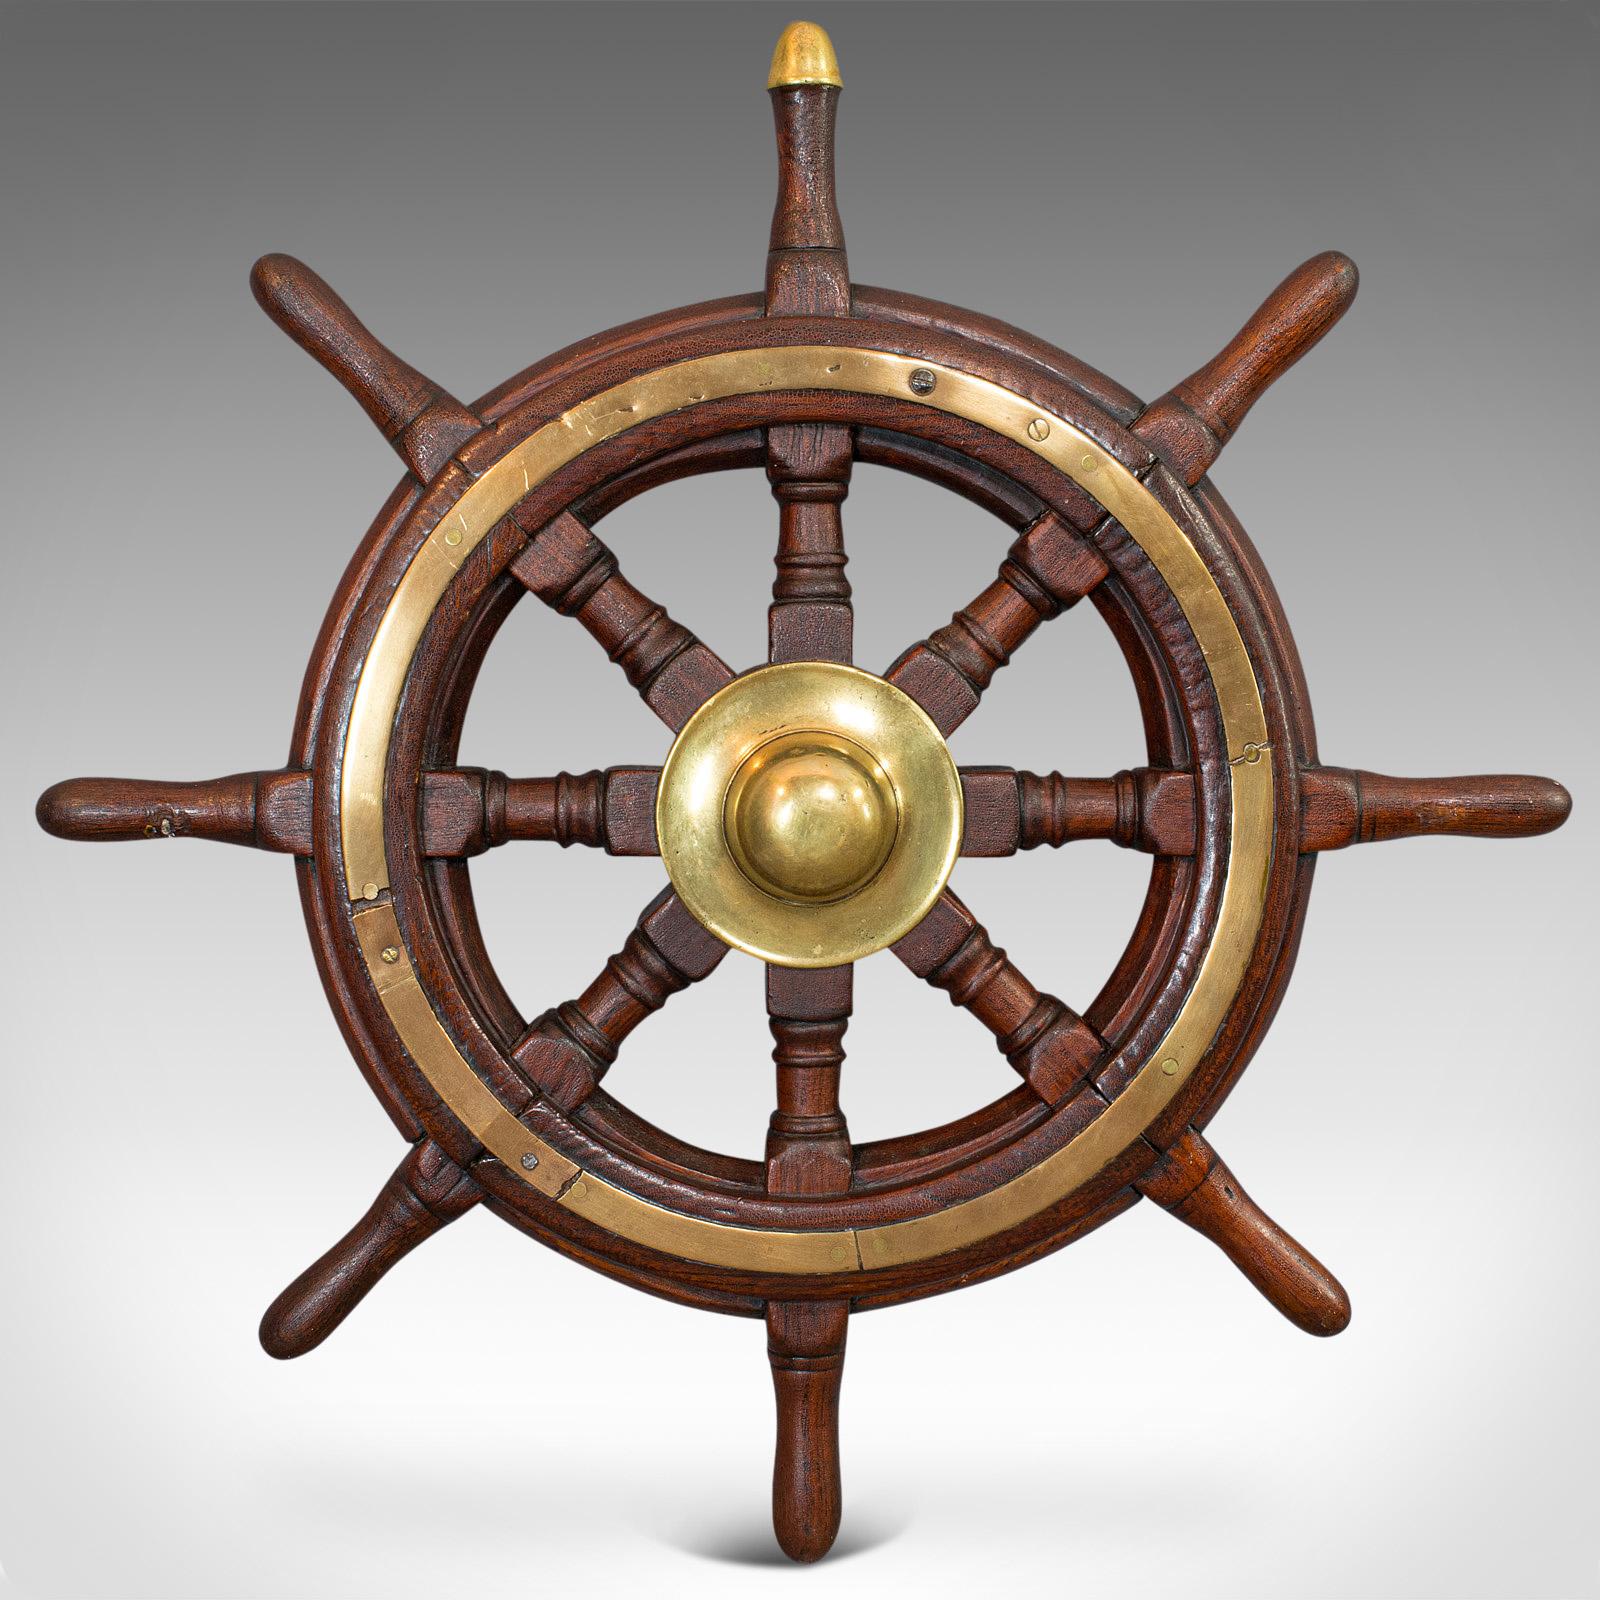 This is an antique original ship's wheel. An English, oak maritime collectable helm, dating to the Victorian period, circa 1900.

Appealing maritime display piece
Displays a desirable aged patina
Solid oak shows fine grain interest and